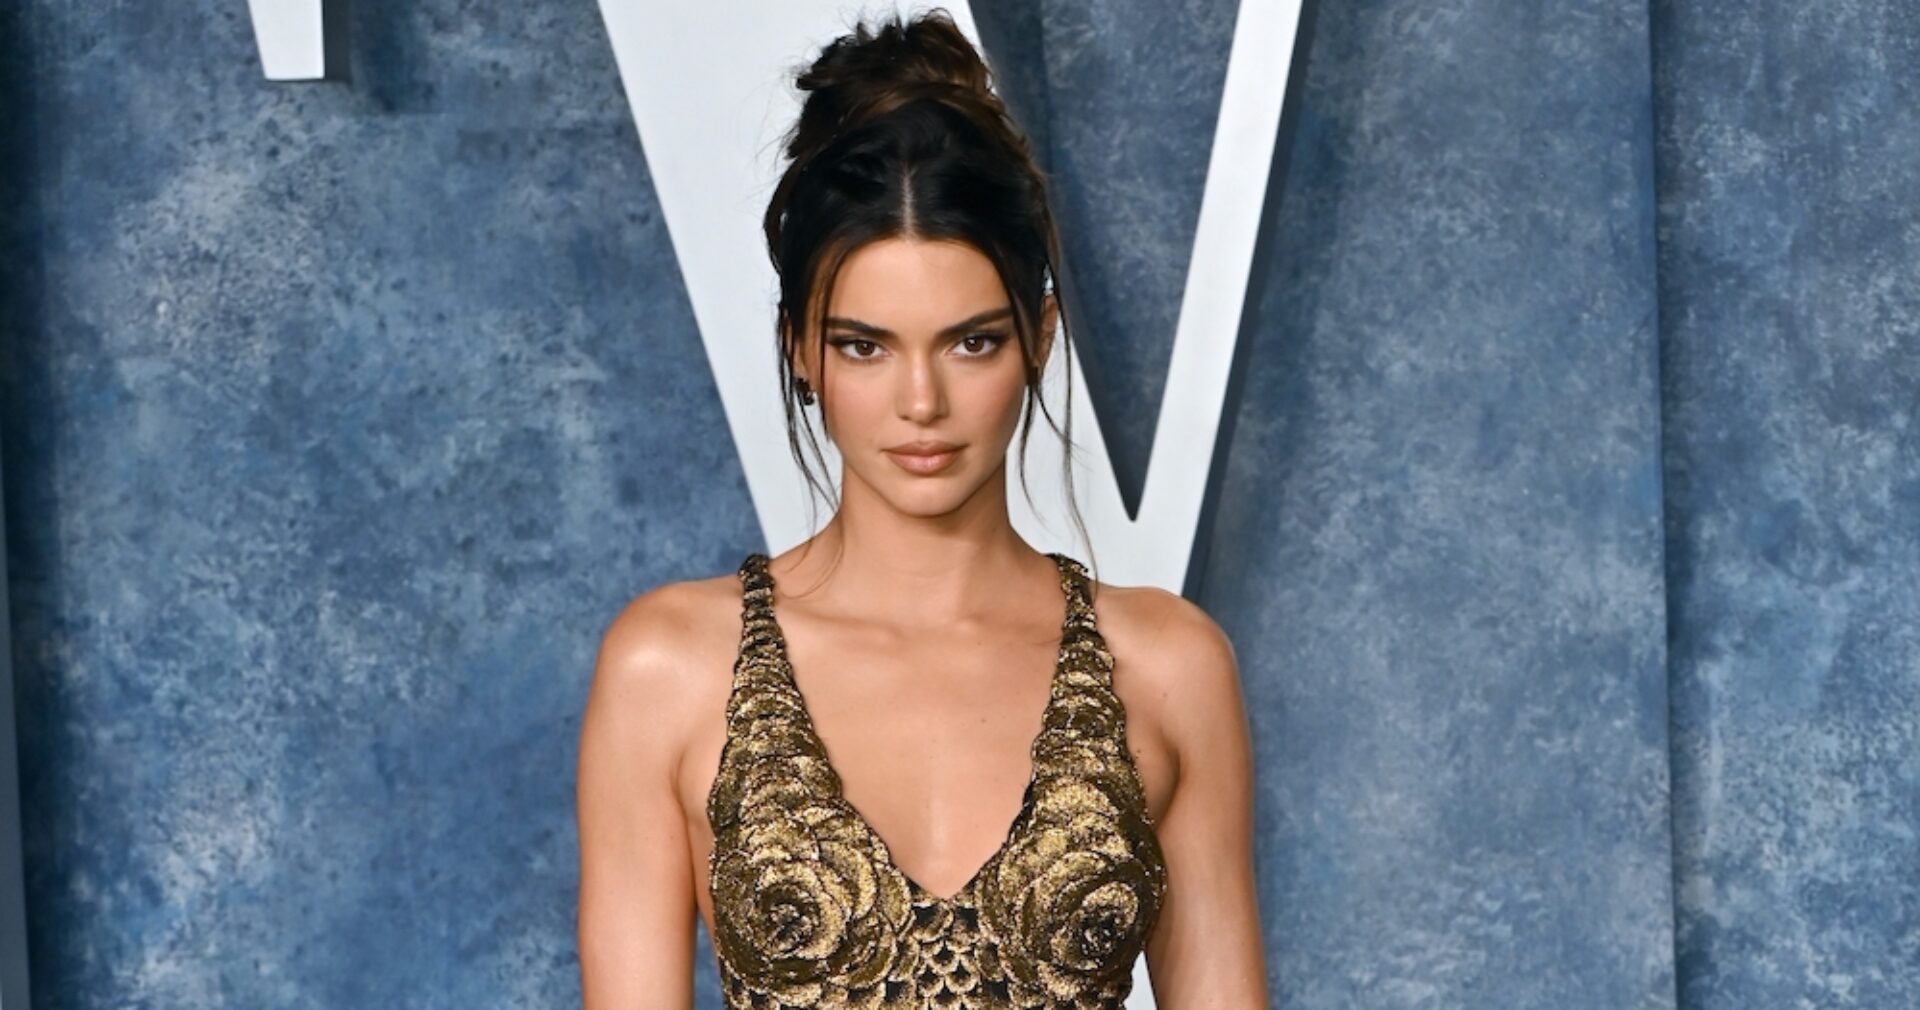 Kendall Jenner graced her fans with a hilarious Mean Girls inspired video while visiting Ohio State University.